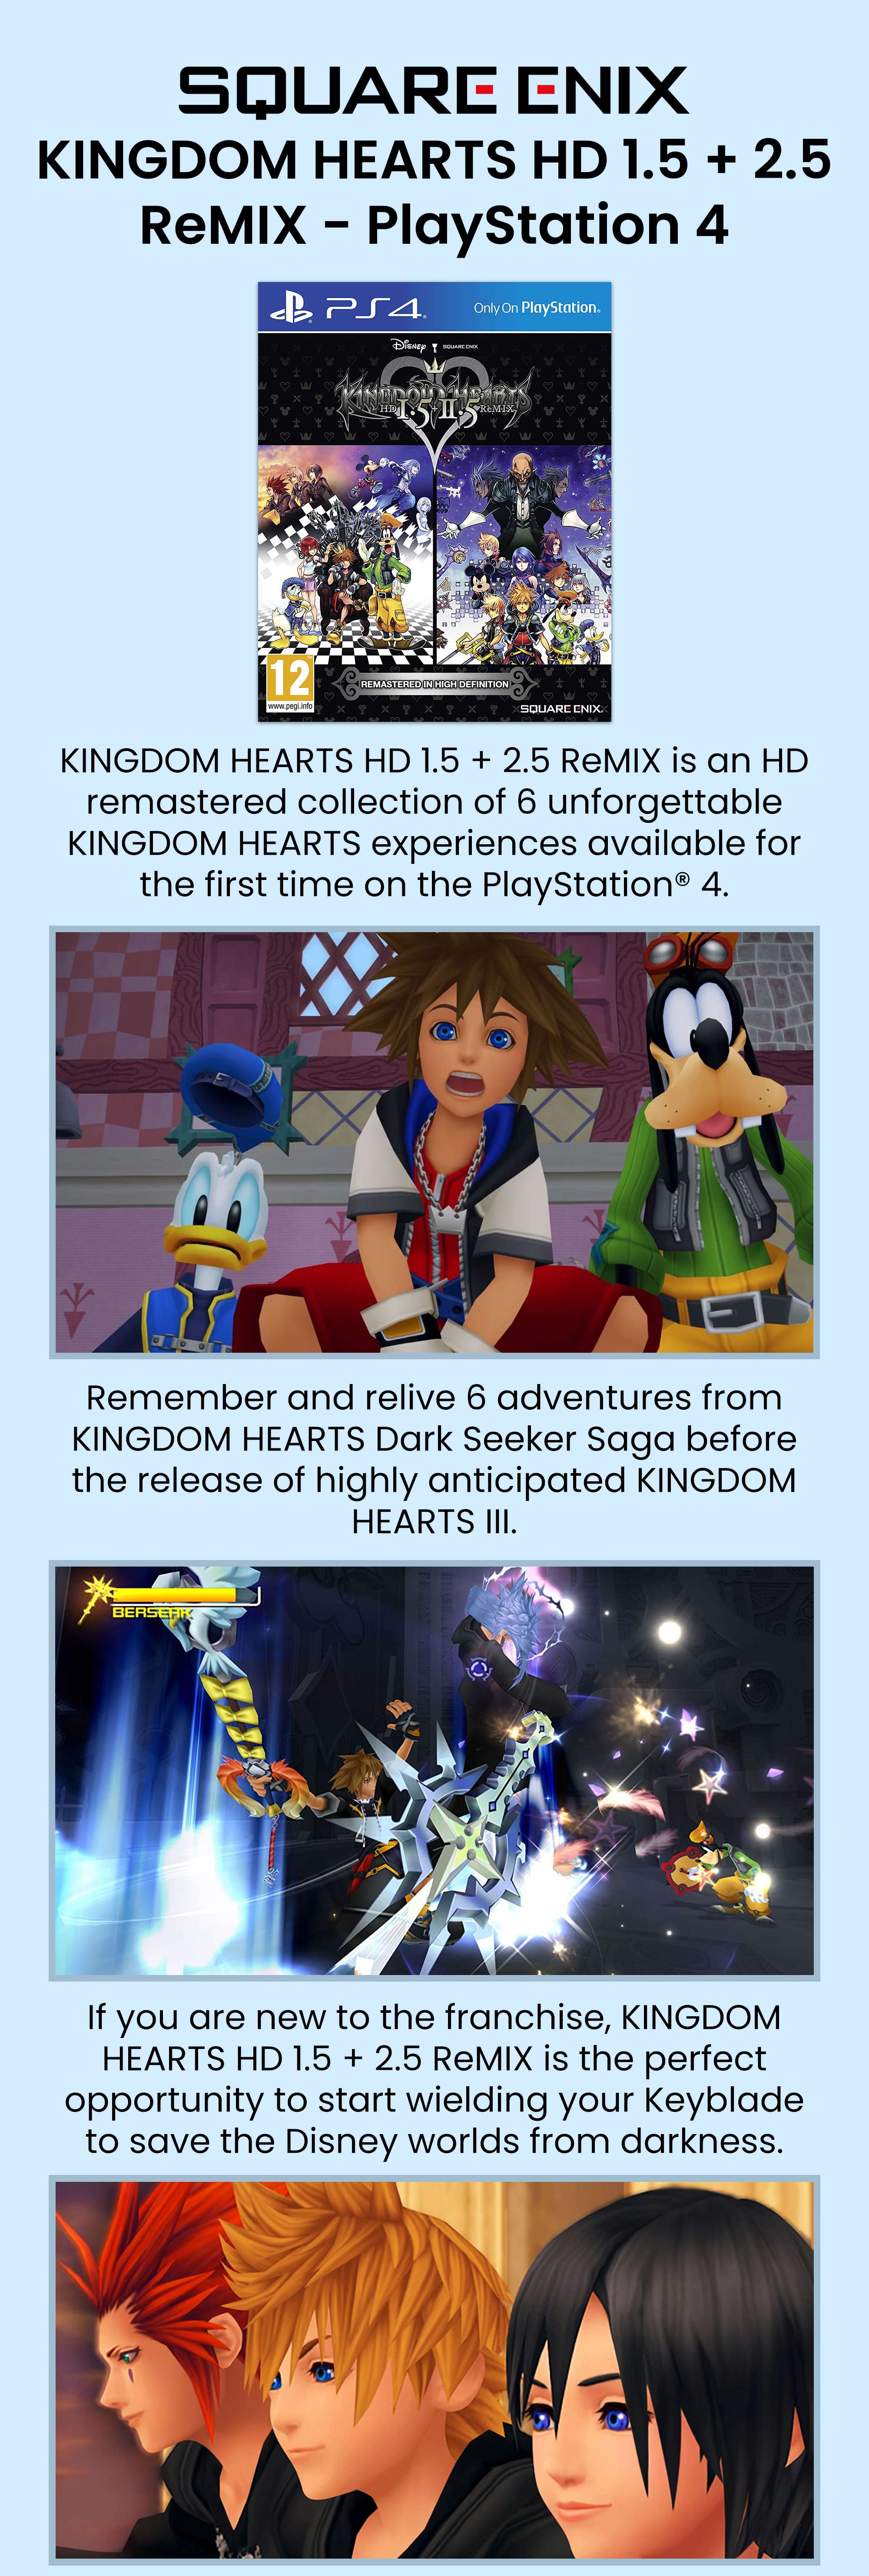 Square Enix Kingdom Hearts HD 1.5 + 2.5 Remix (Intl Version) - Role Playing  - PlayStation 4 (PS4) UAE